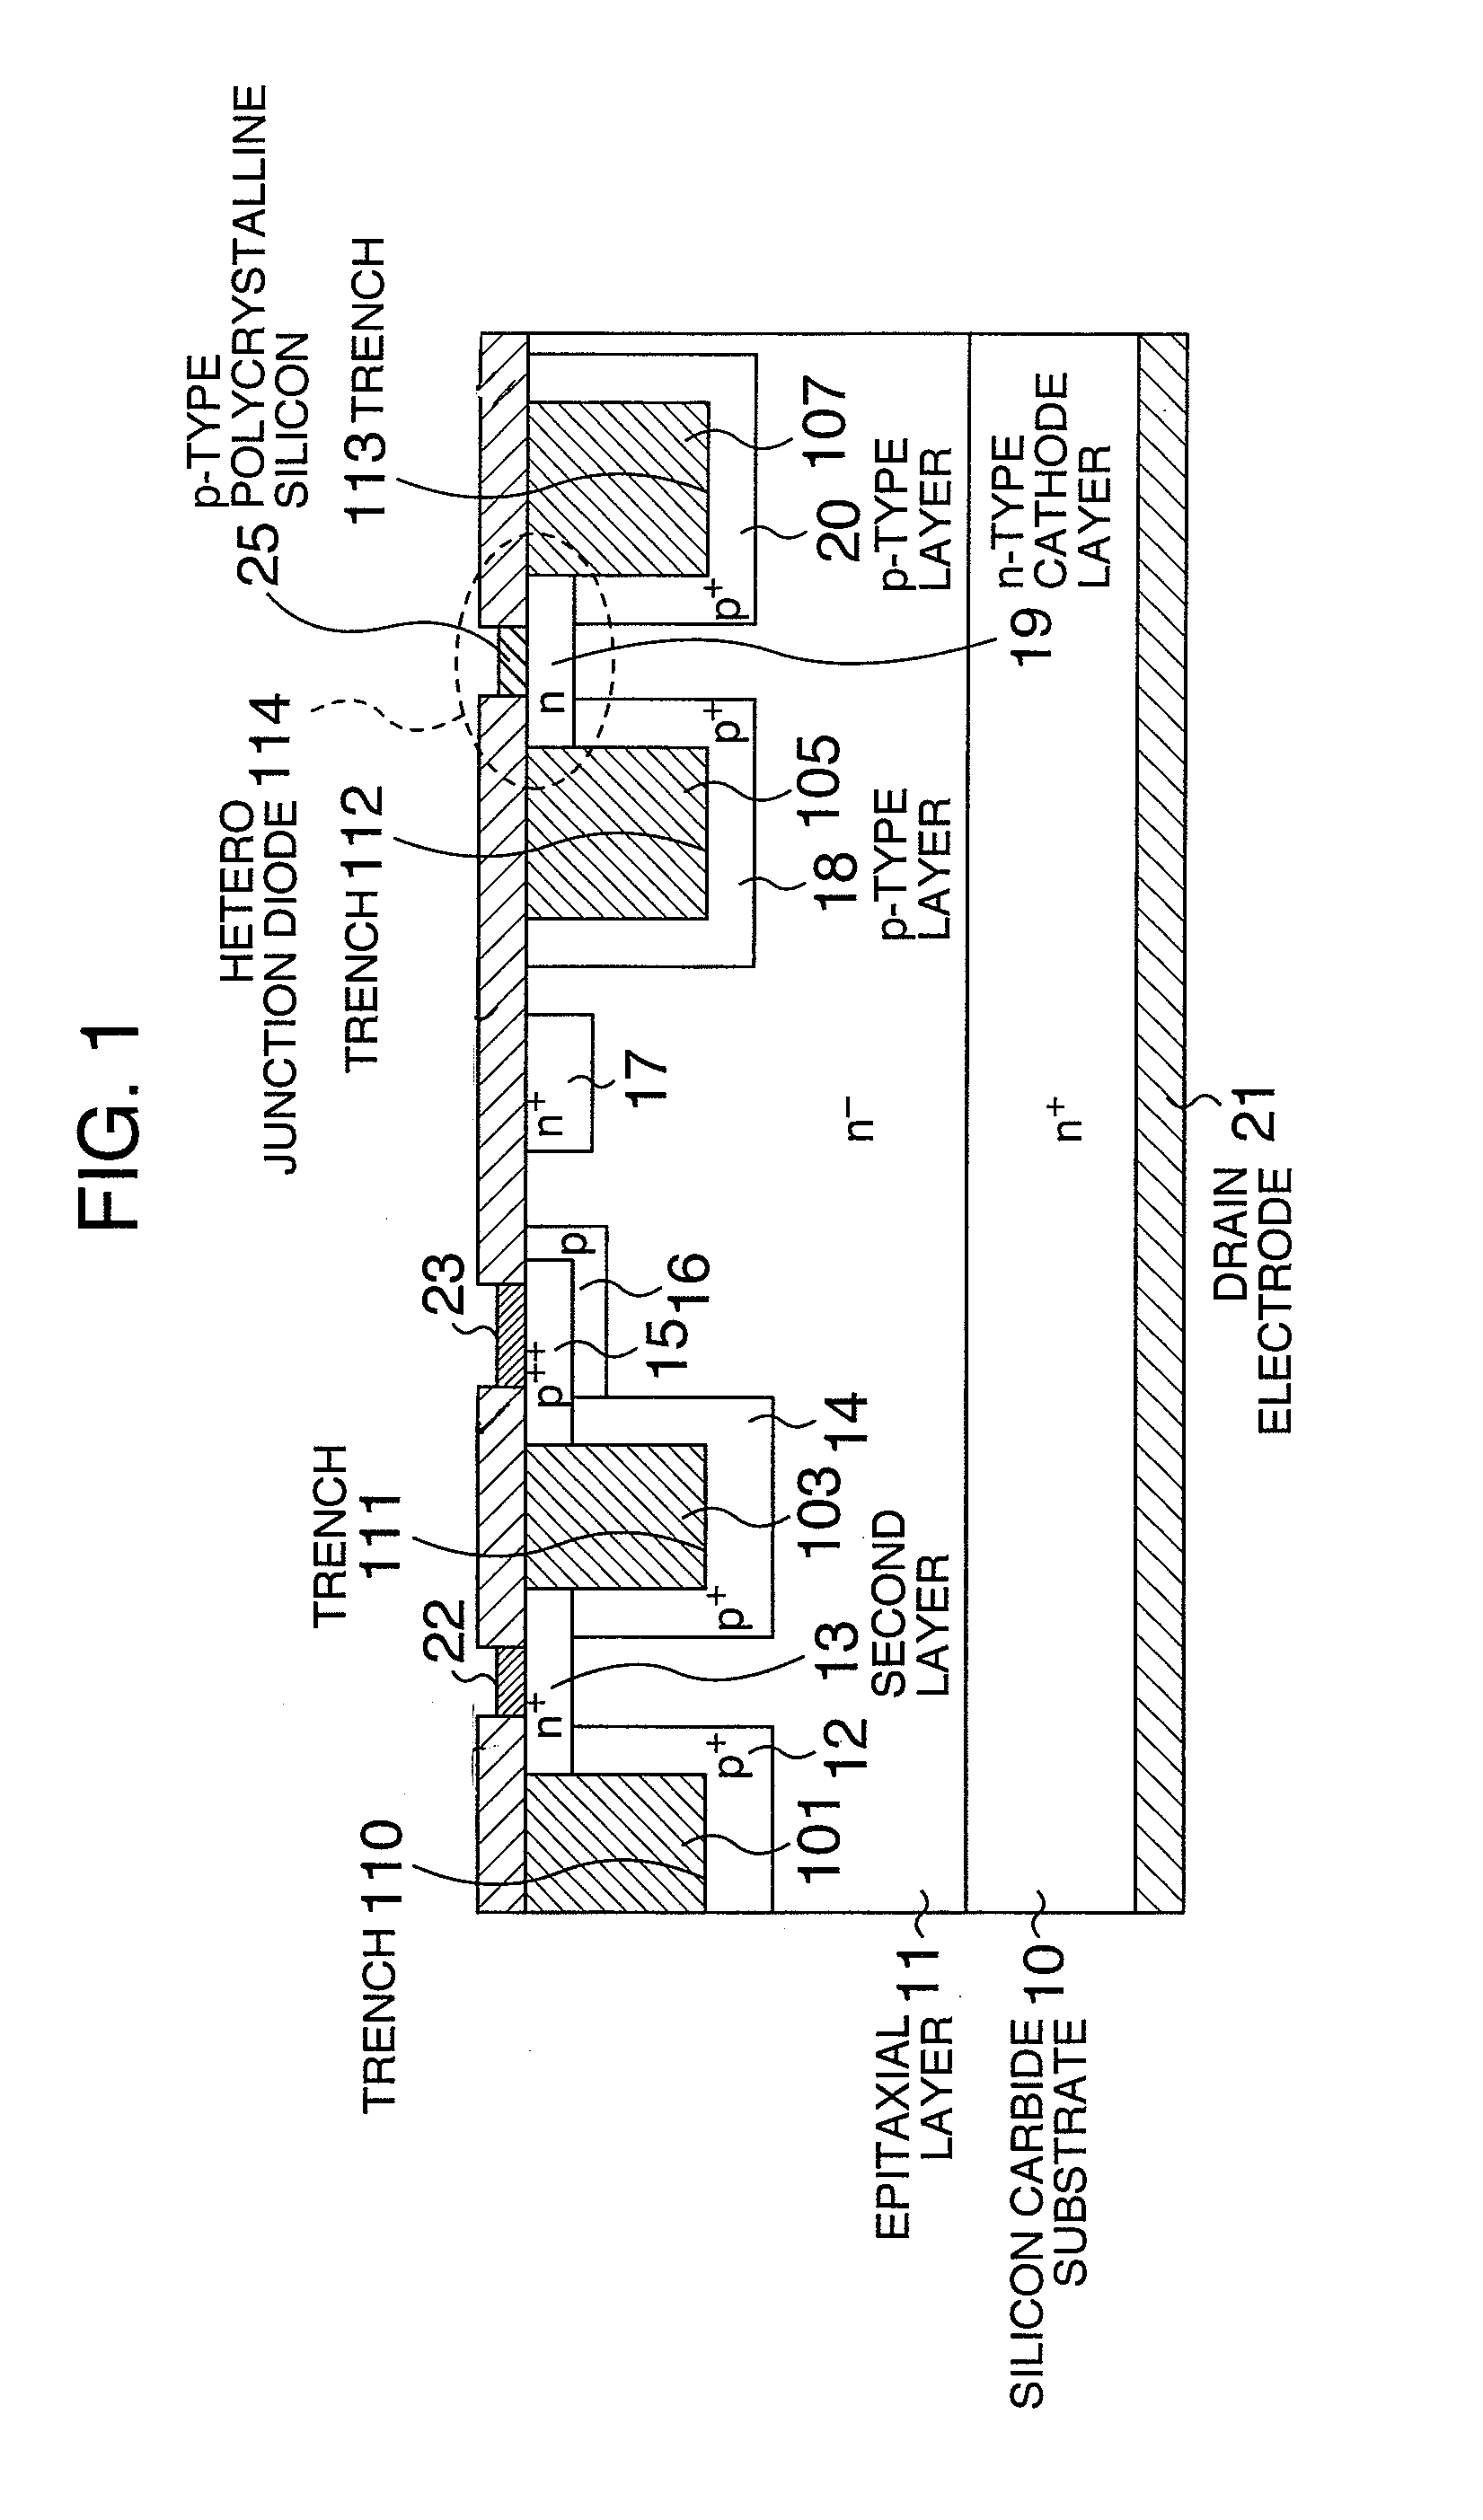 Semiconductor device including a vertical field effect transistor, having trenches, and a diode